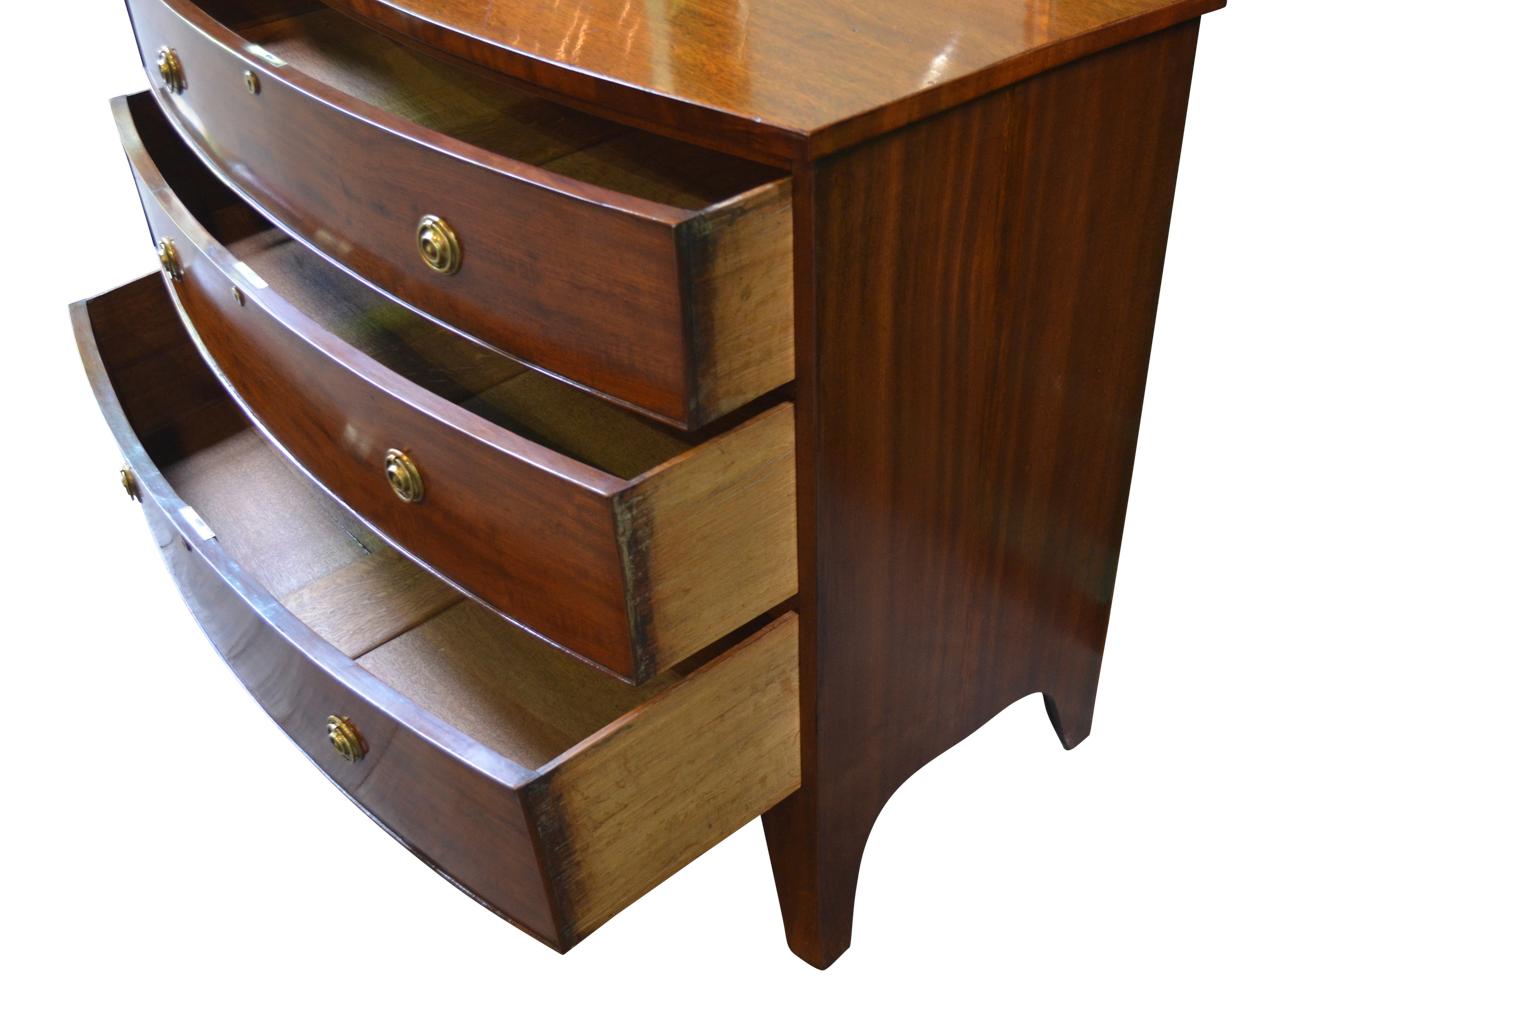 English 19th century George IV mahogany bow fronted chest of drawers terminated on splayed feet, circa 1830.